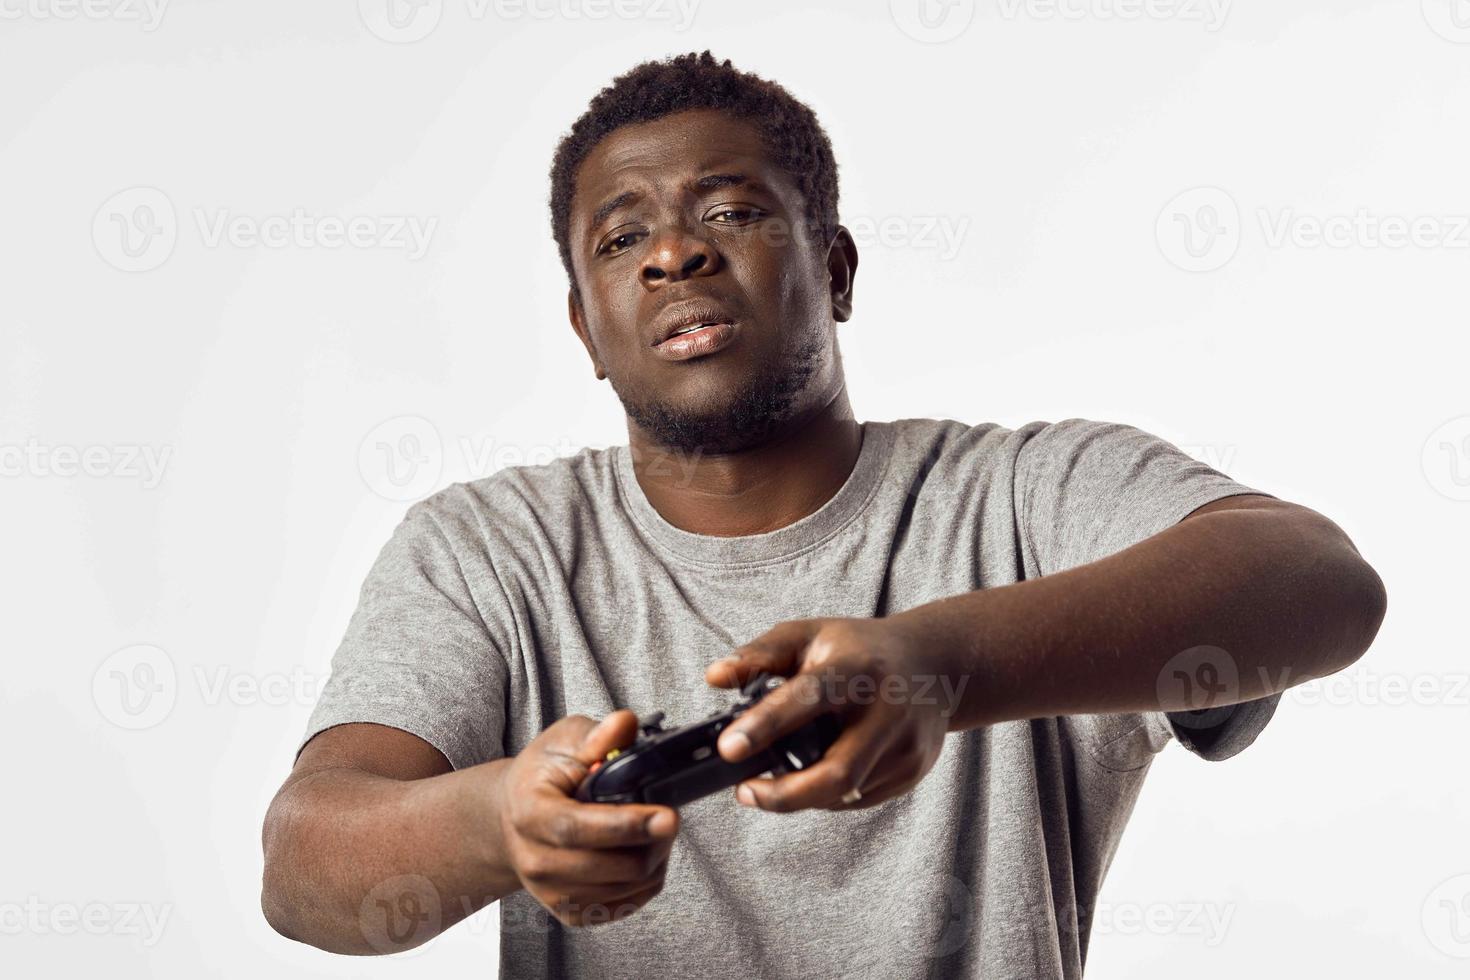 Cheerful man of African appearance with a joystick in his hands plays video games photo